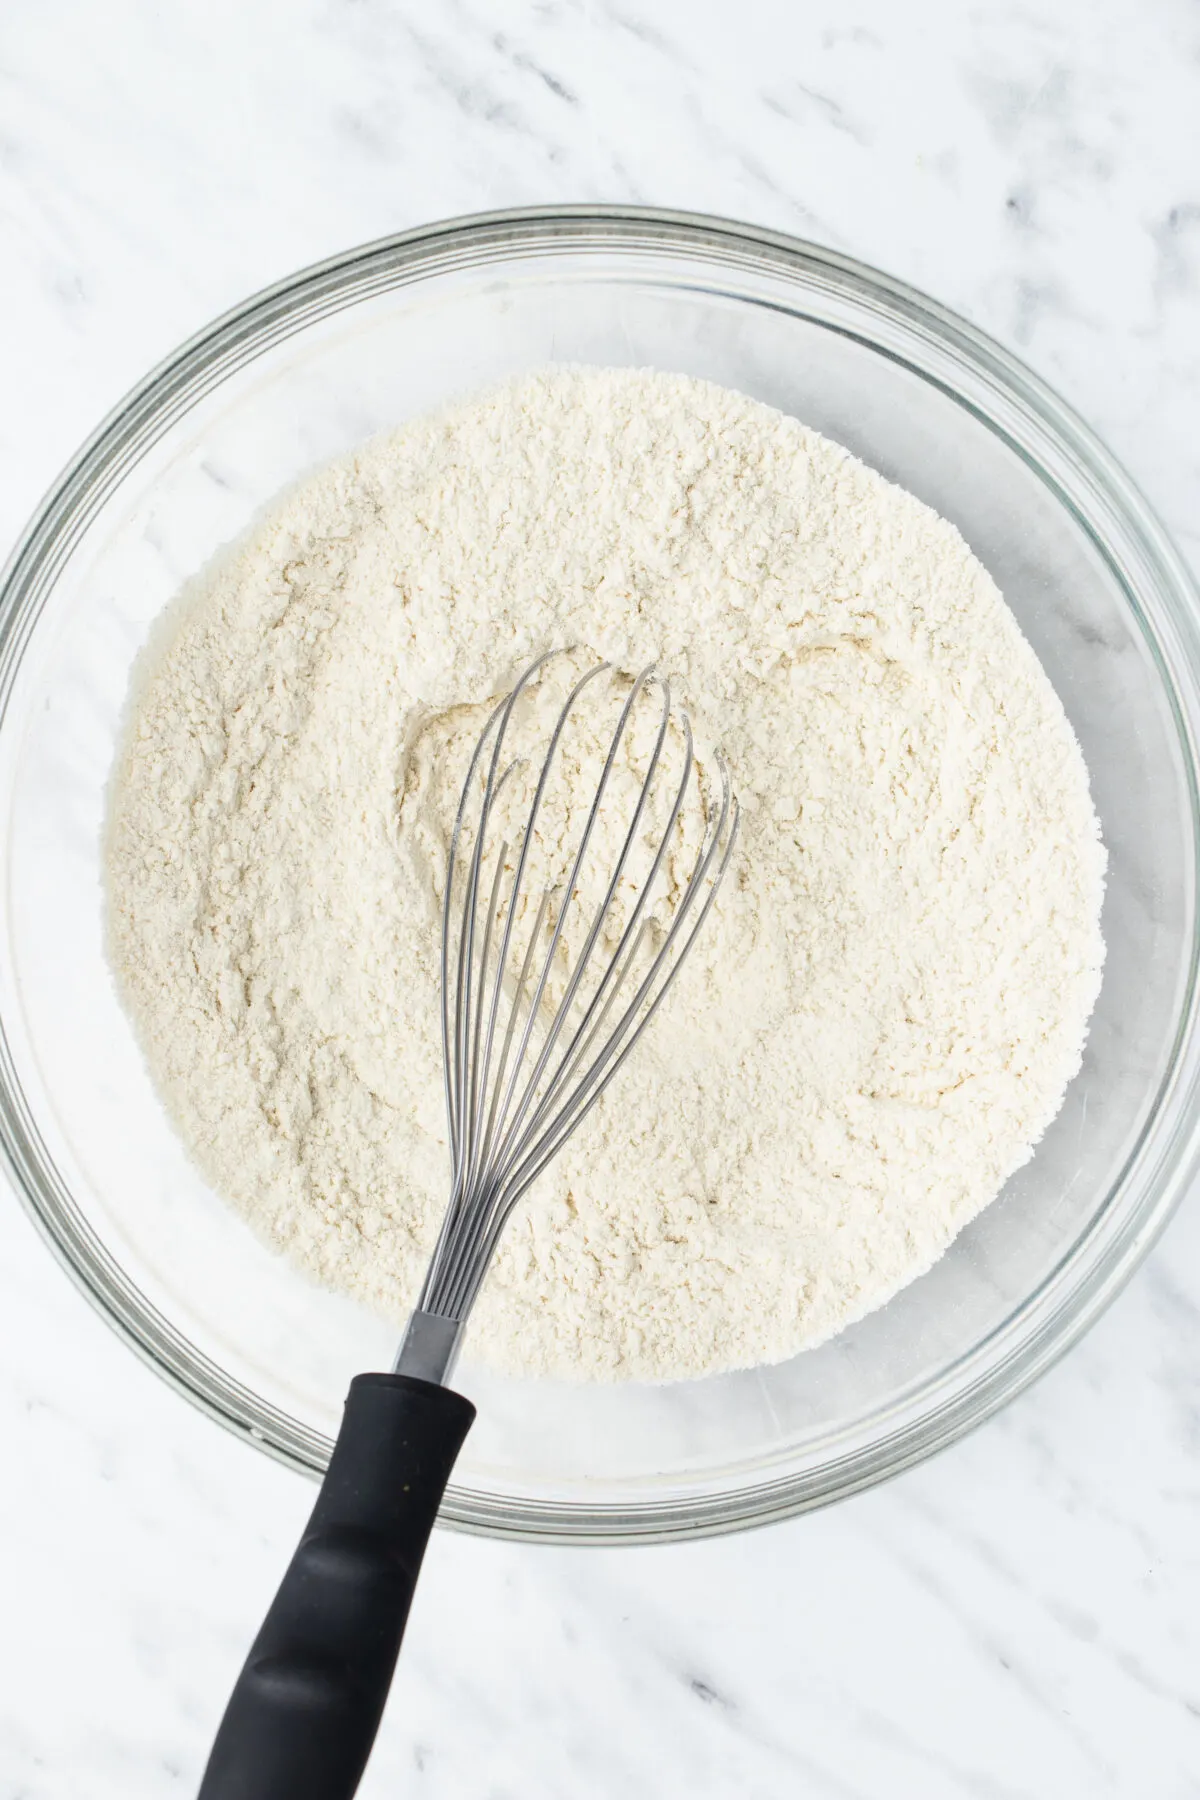 Mixing together all the dry ingredients in a large bowl with a whisk.